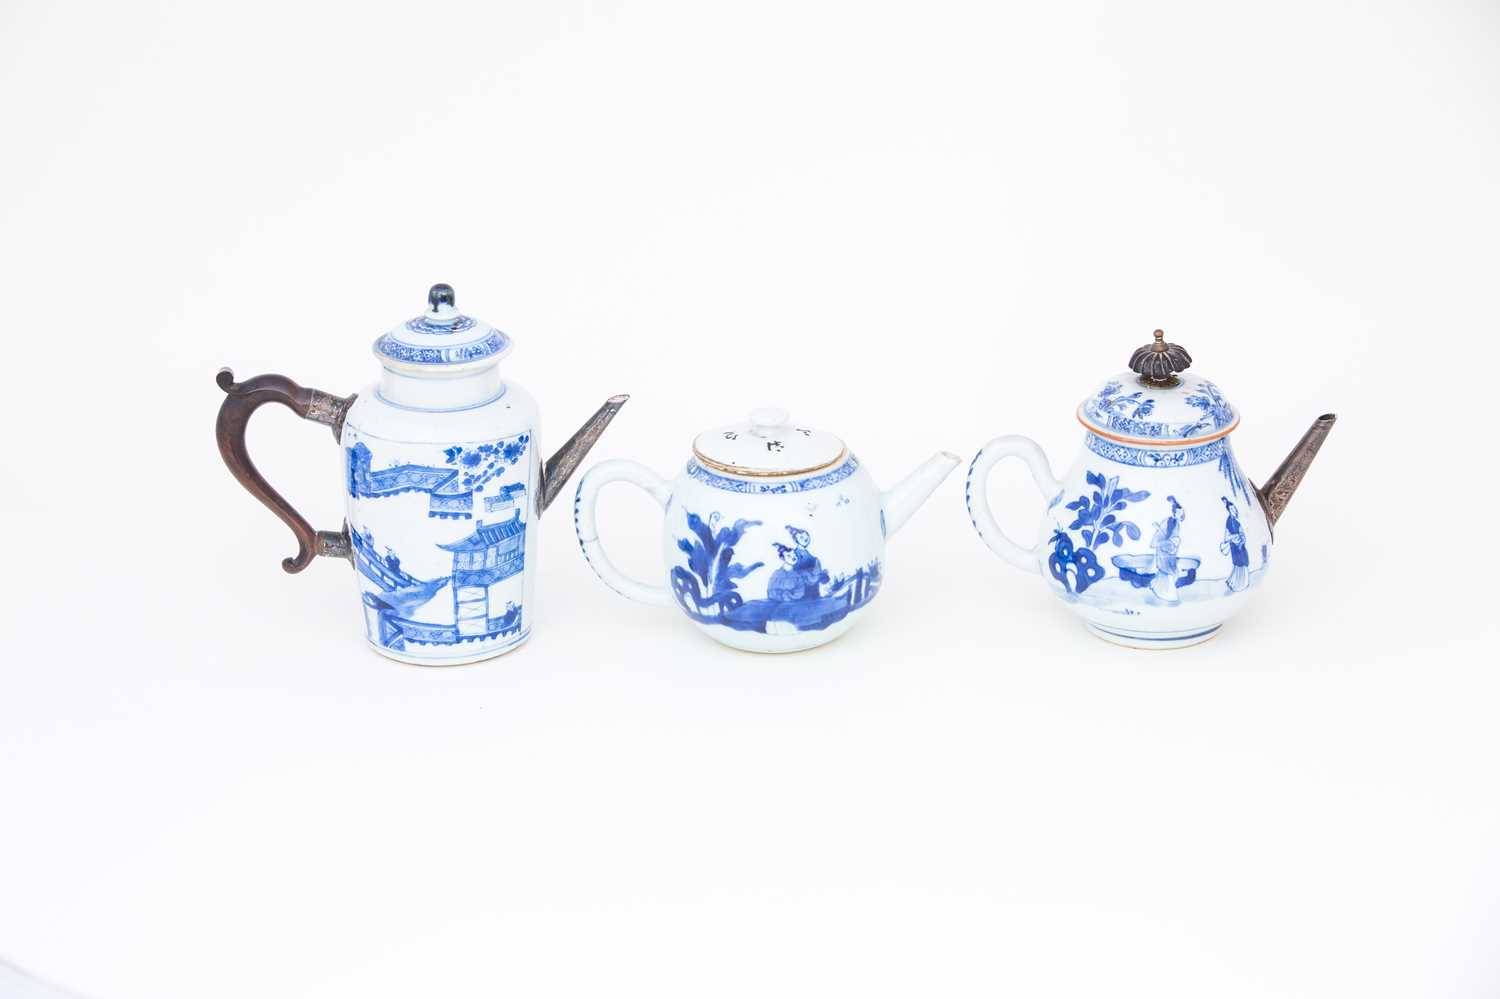 A Chinese blue & white wine pot and two teapots, Kangxi, 中国，青花酒壶一件，康熙，18世纪初，及其他 early 18th - Image 3 of 4